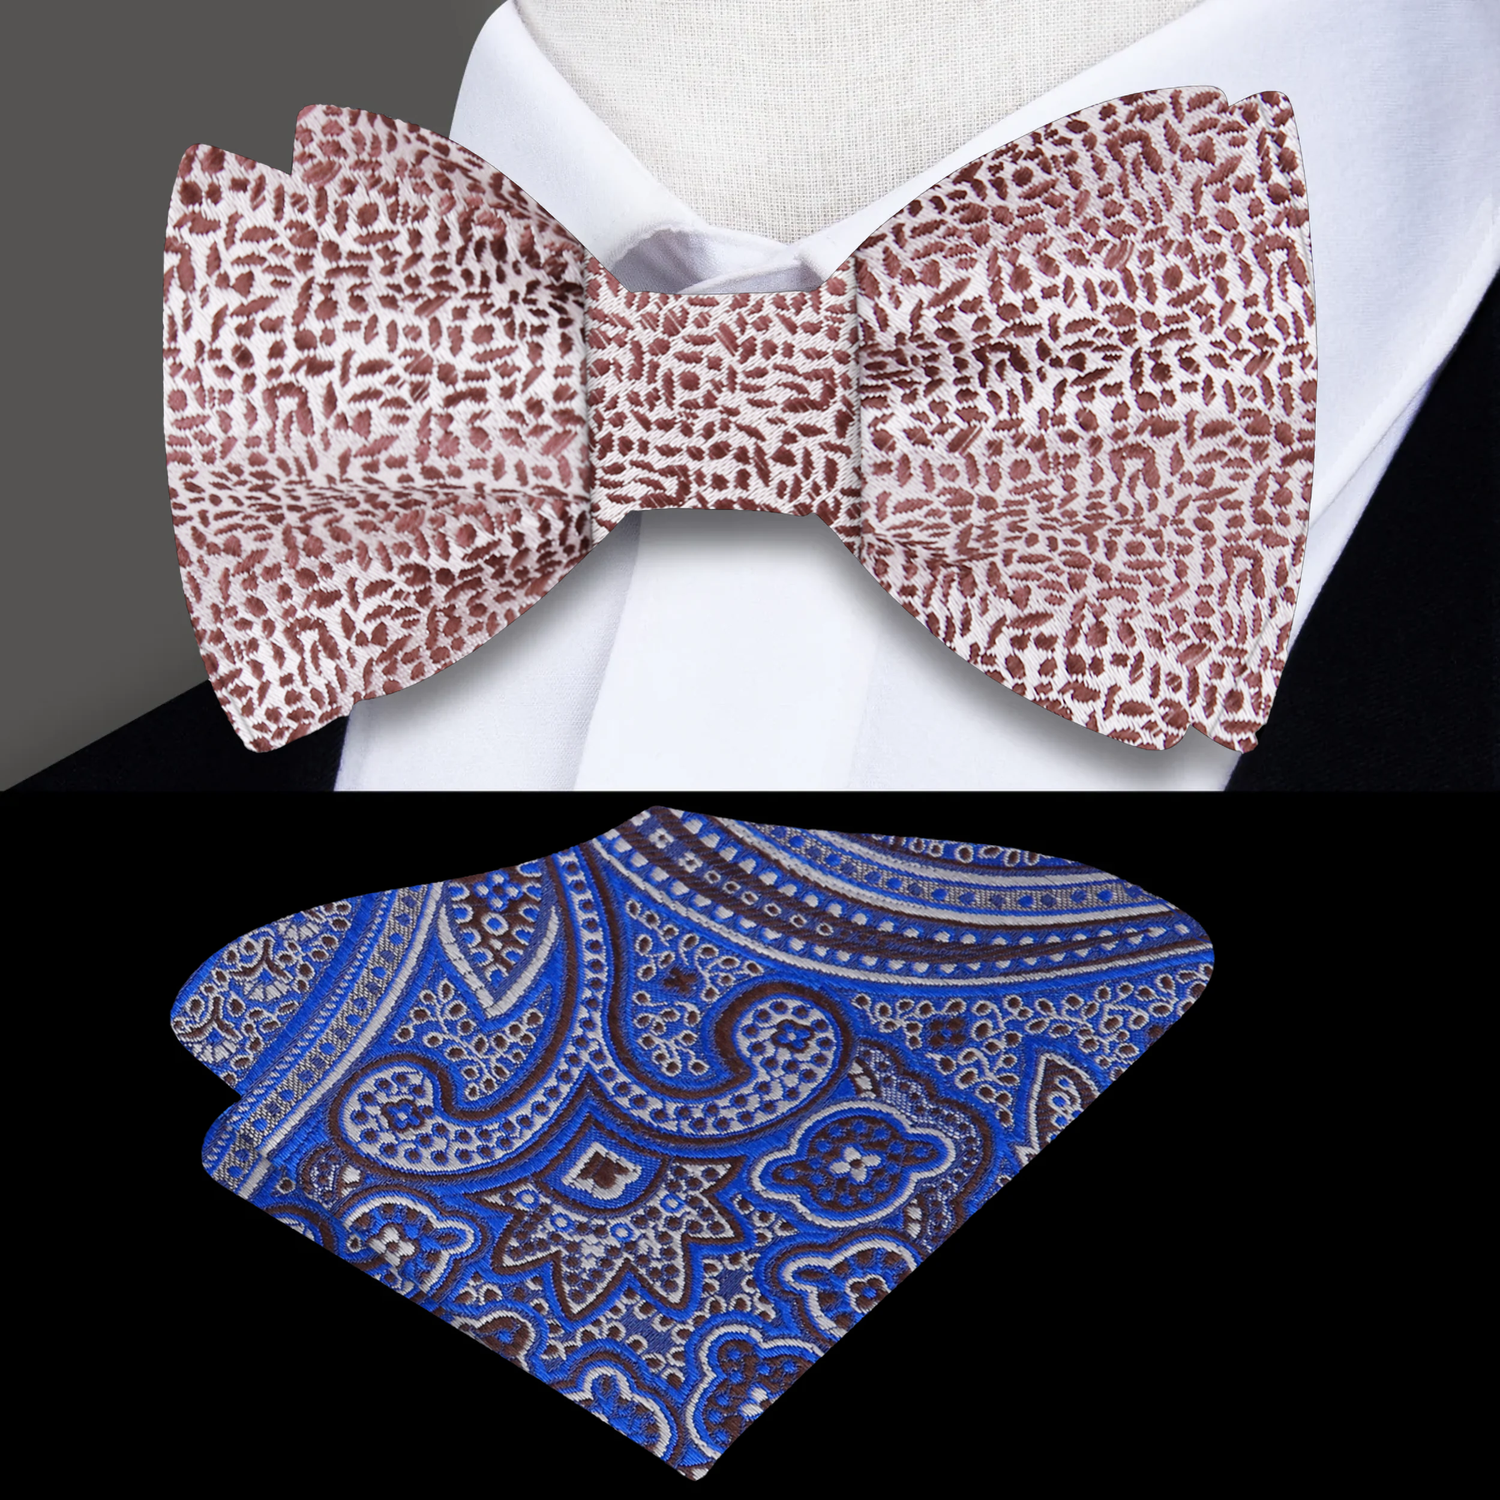 A Cream, Mahogany Textured Pattern Silk Self Tie Bow Tie, Accenting Blue and Brown Paisley Pocket Square||Brown